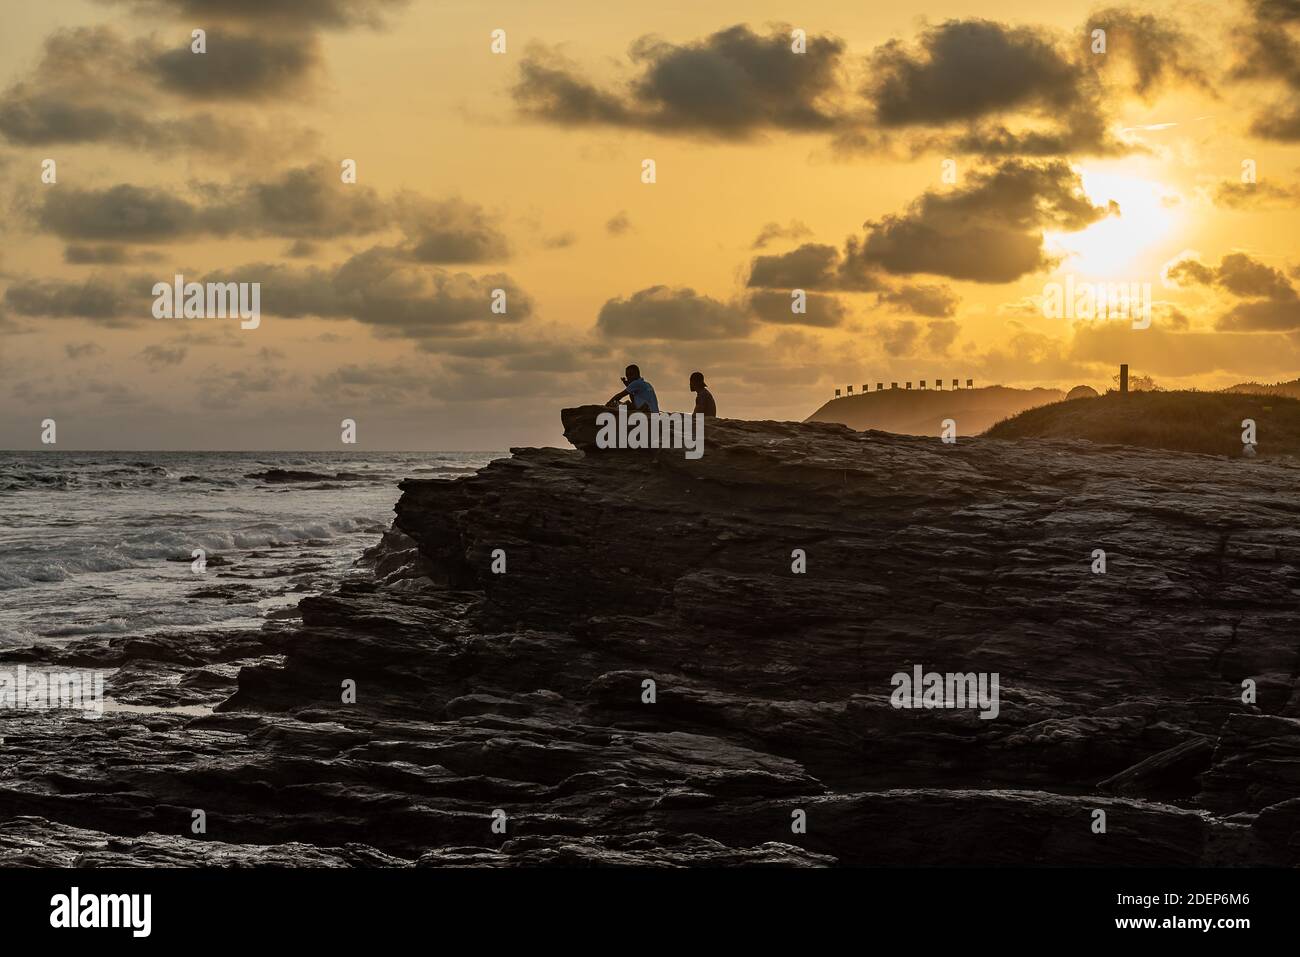 Sunset over Accra beach with rocks and two people sitting and enjoying the sea with hilly ground where you see the shooting range signs in the backgro Stock Photo